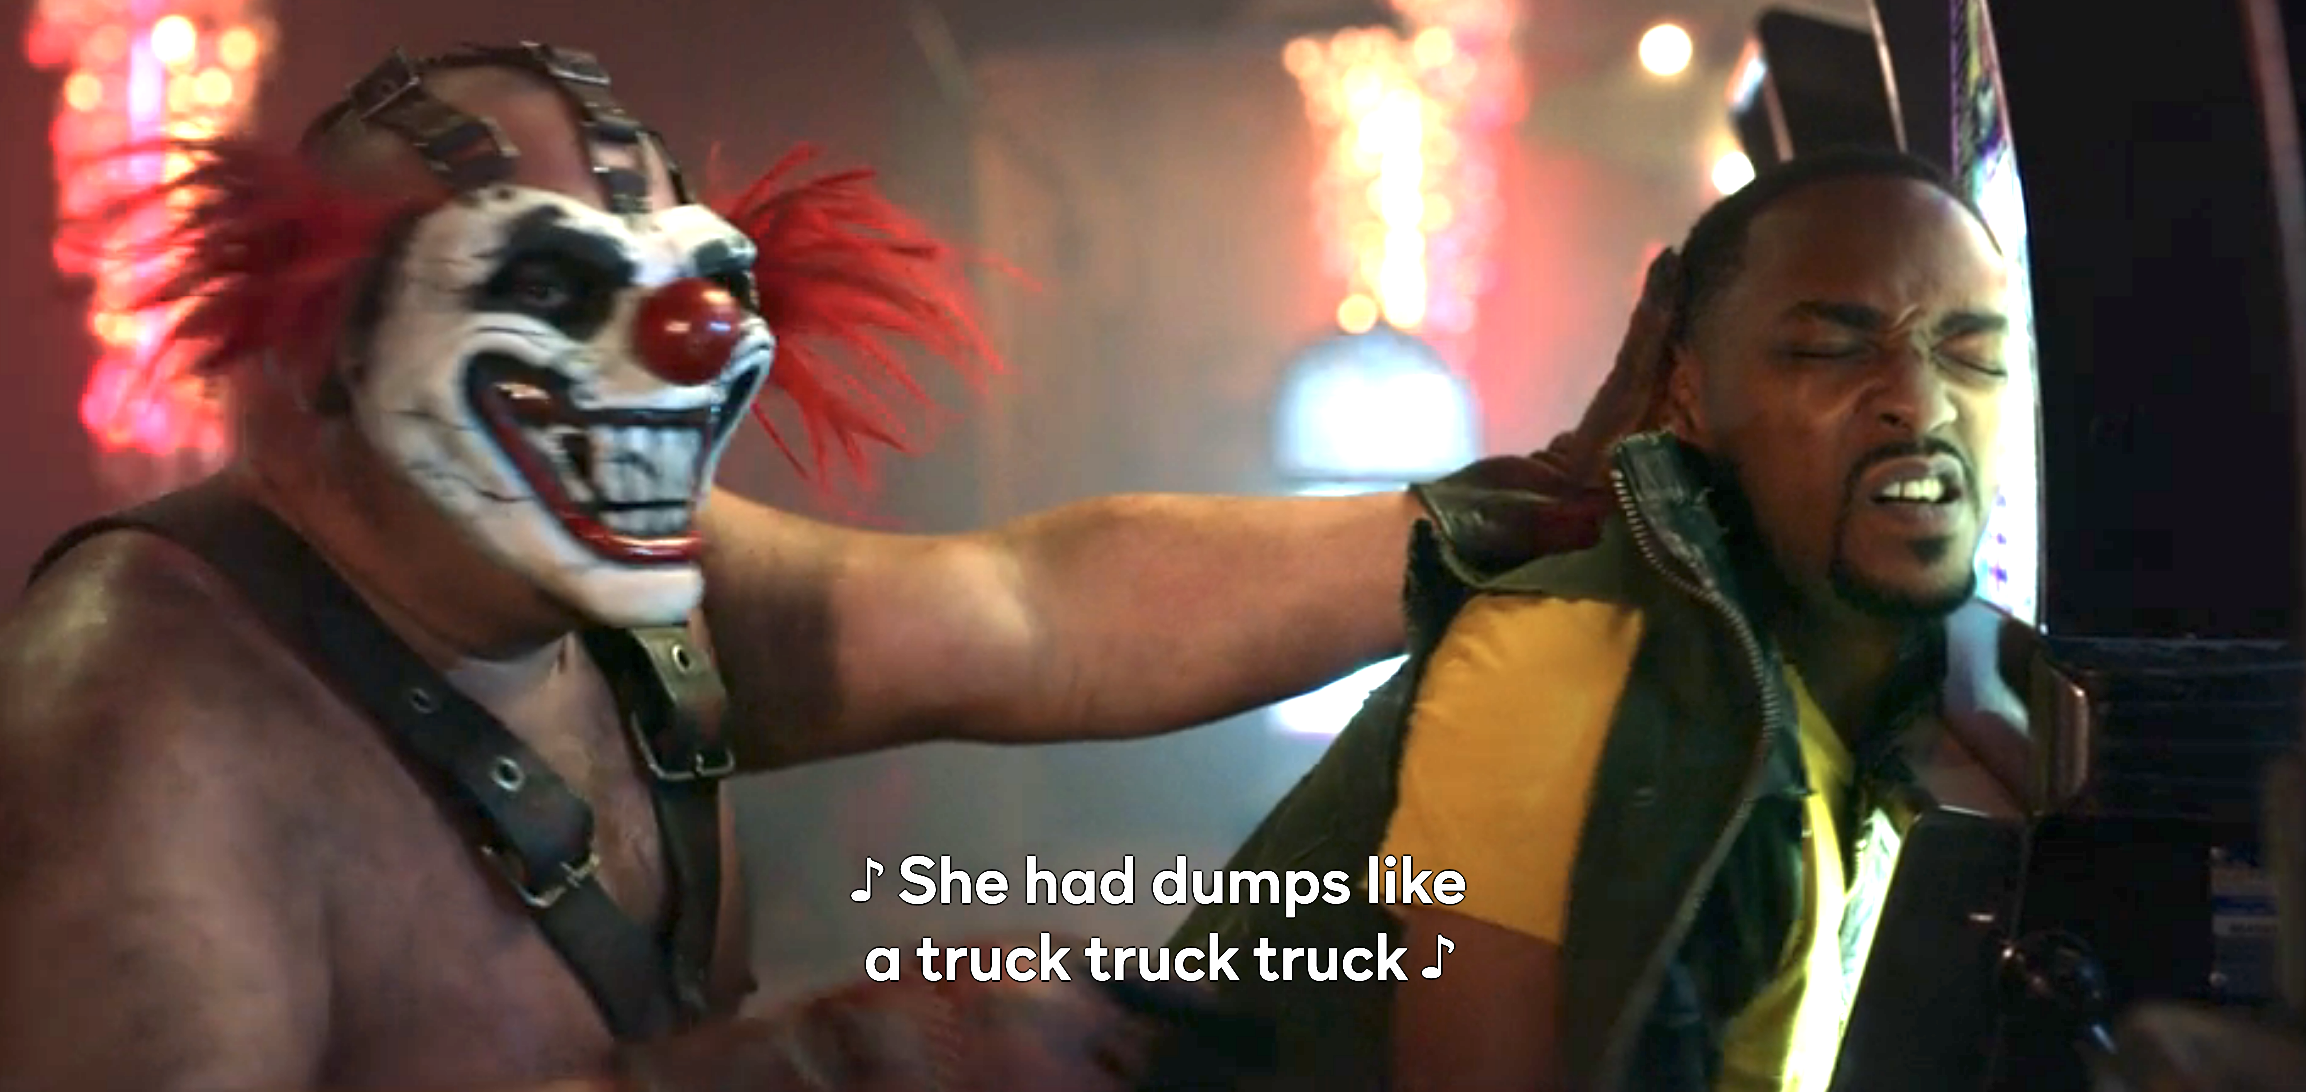 A bare-chested clown standing behind a man with the caption &quot;She had dumps like a truck, truck, truck&quot;